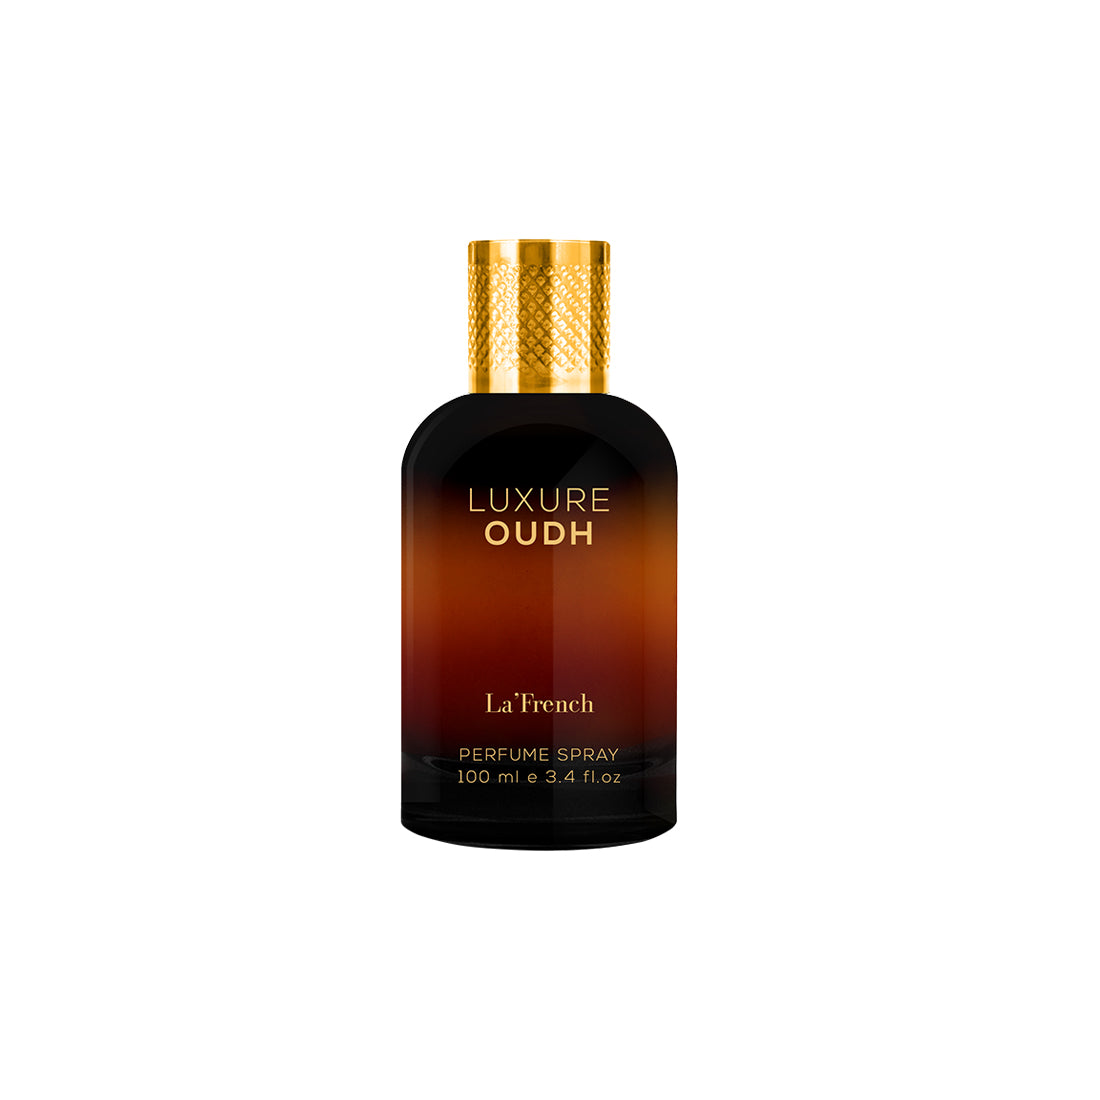 Luxure Oudh Scent